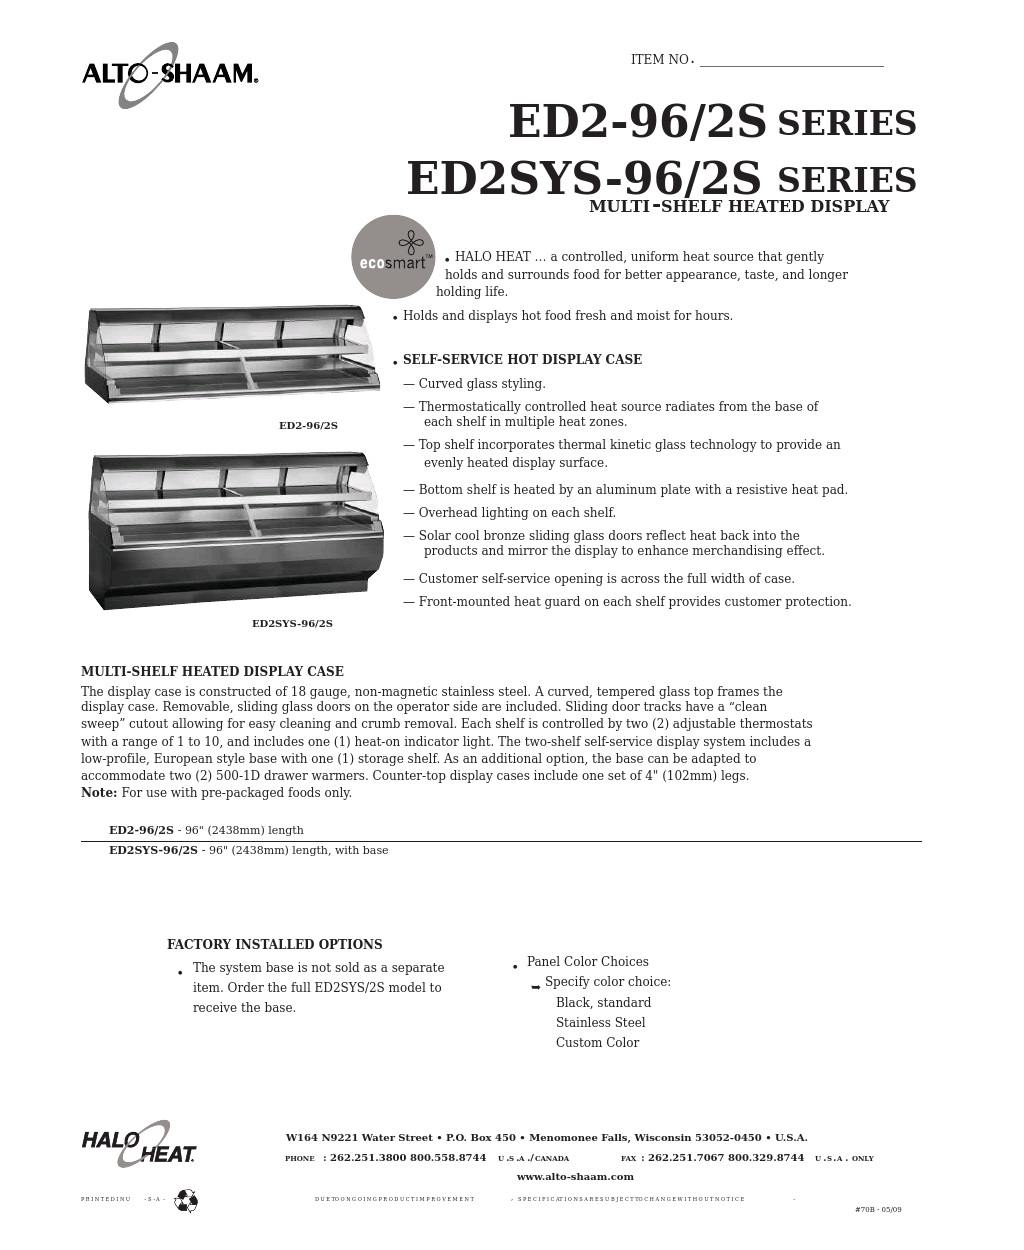 ED2SYS-96/2S